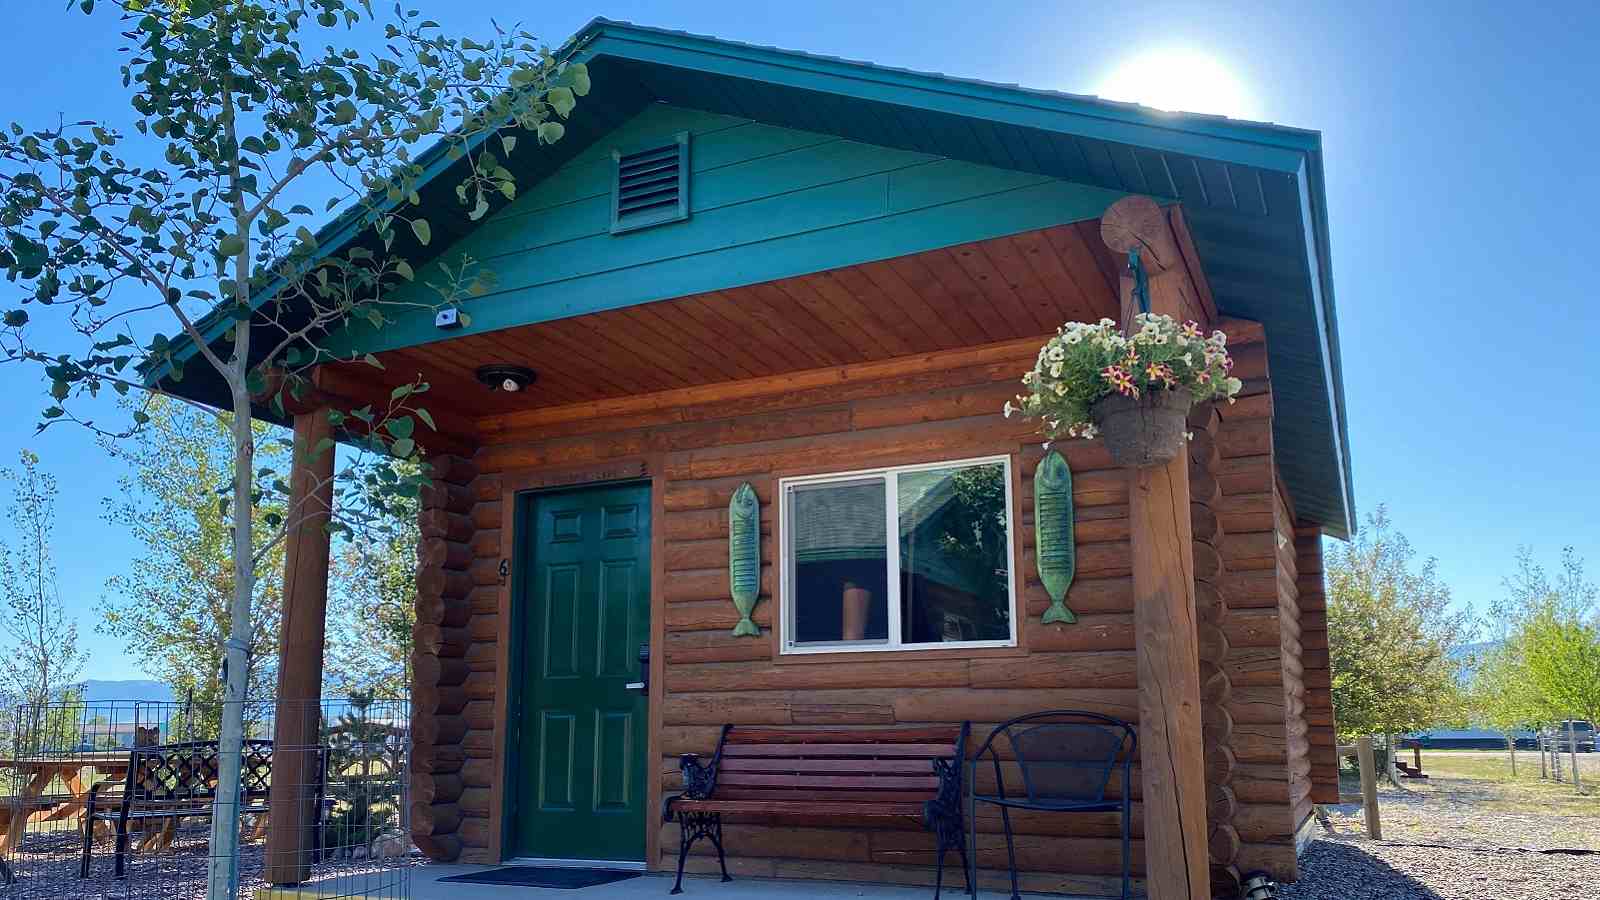 Exterior of a small cabin at the Lure Me Inn in Ennis, Montana with an aspen tree out front and a bench on the porch.